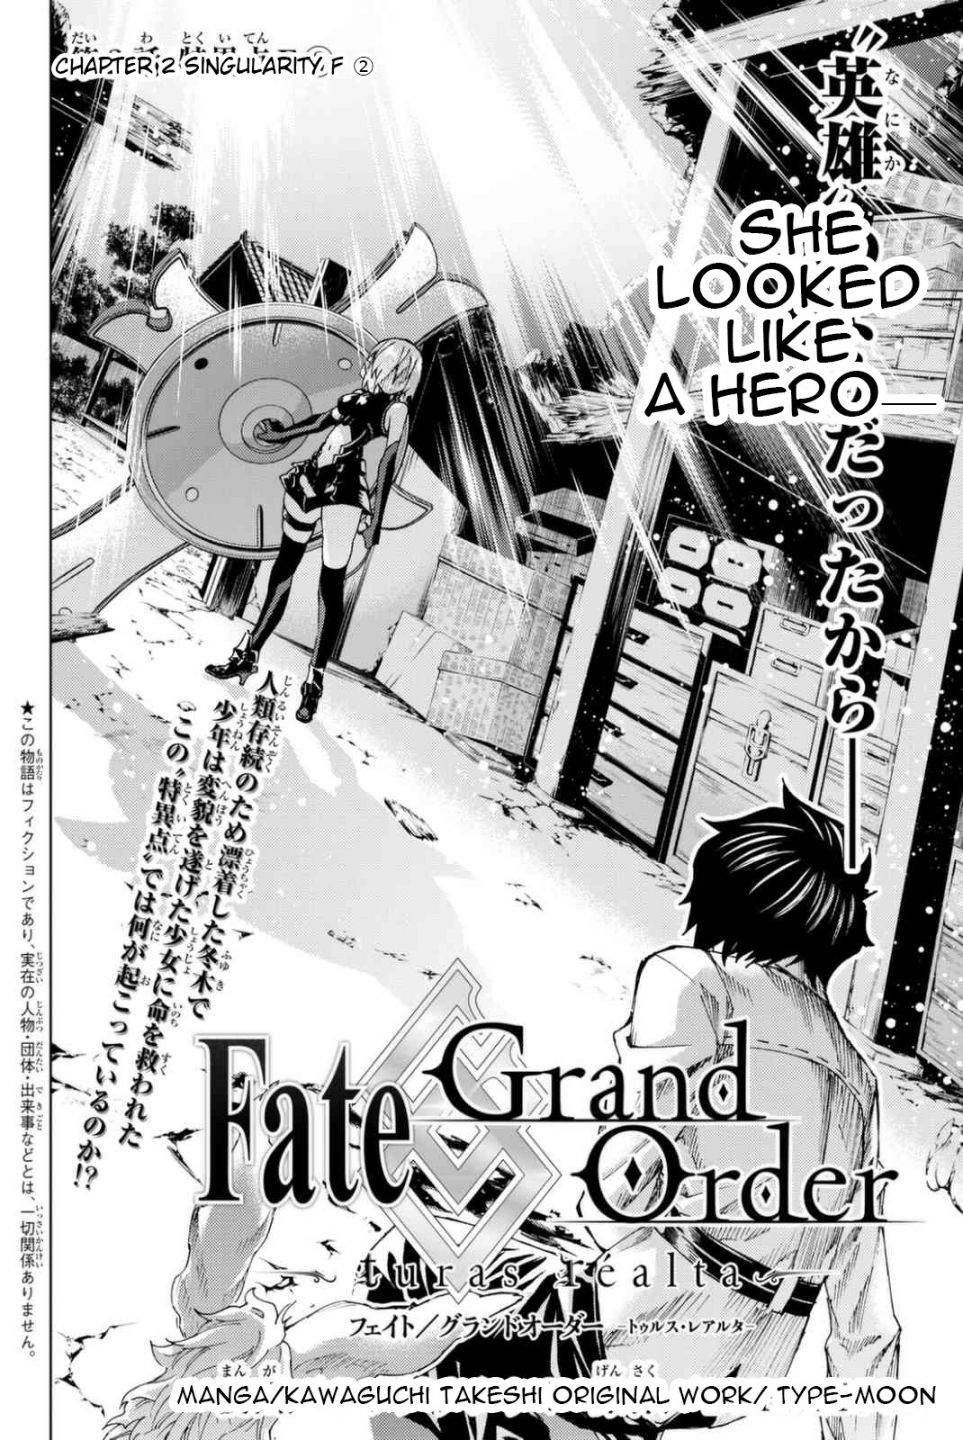 Fate/grand Order -Turas Réalta- - Page 2